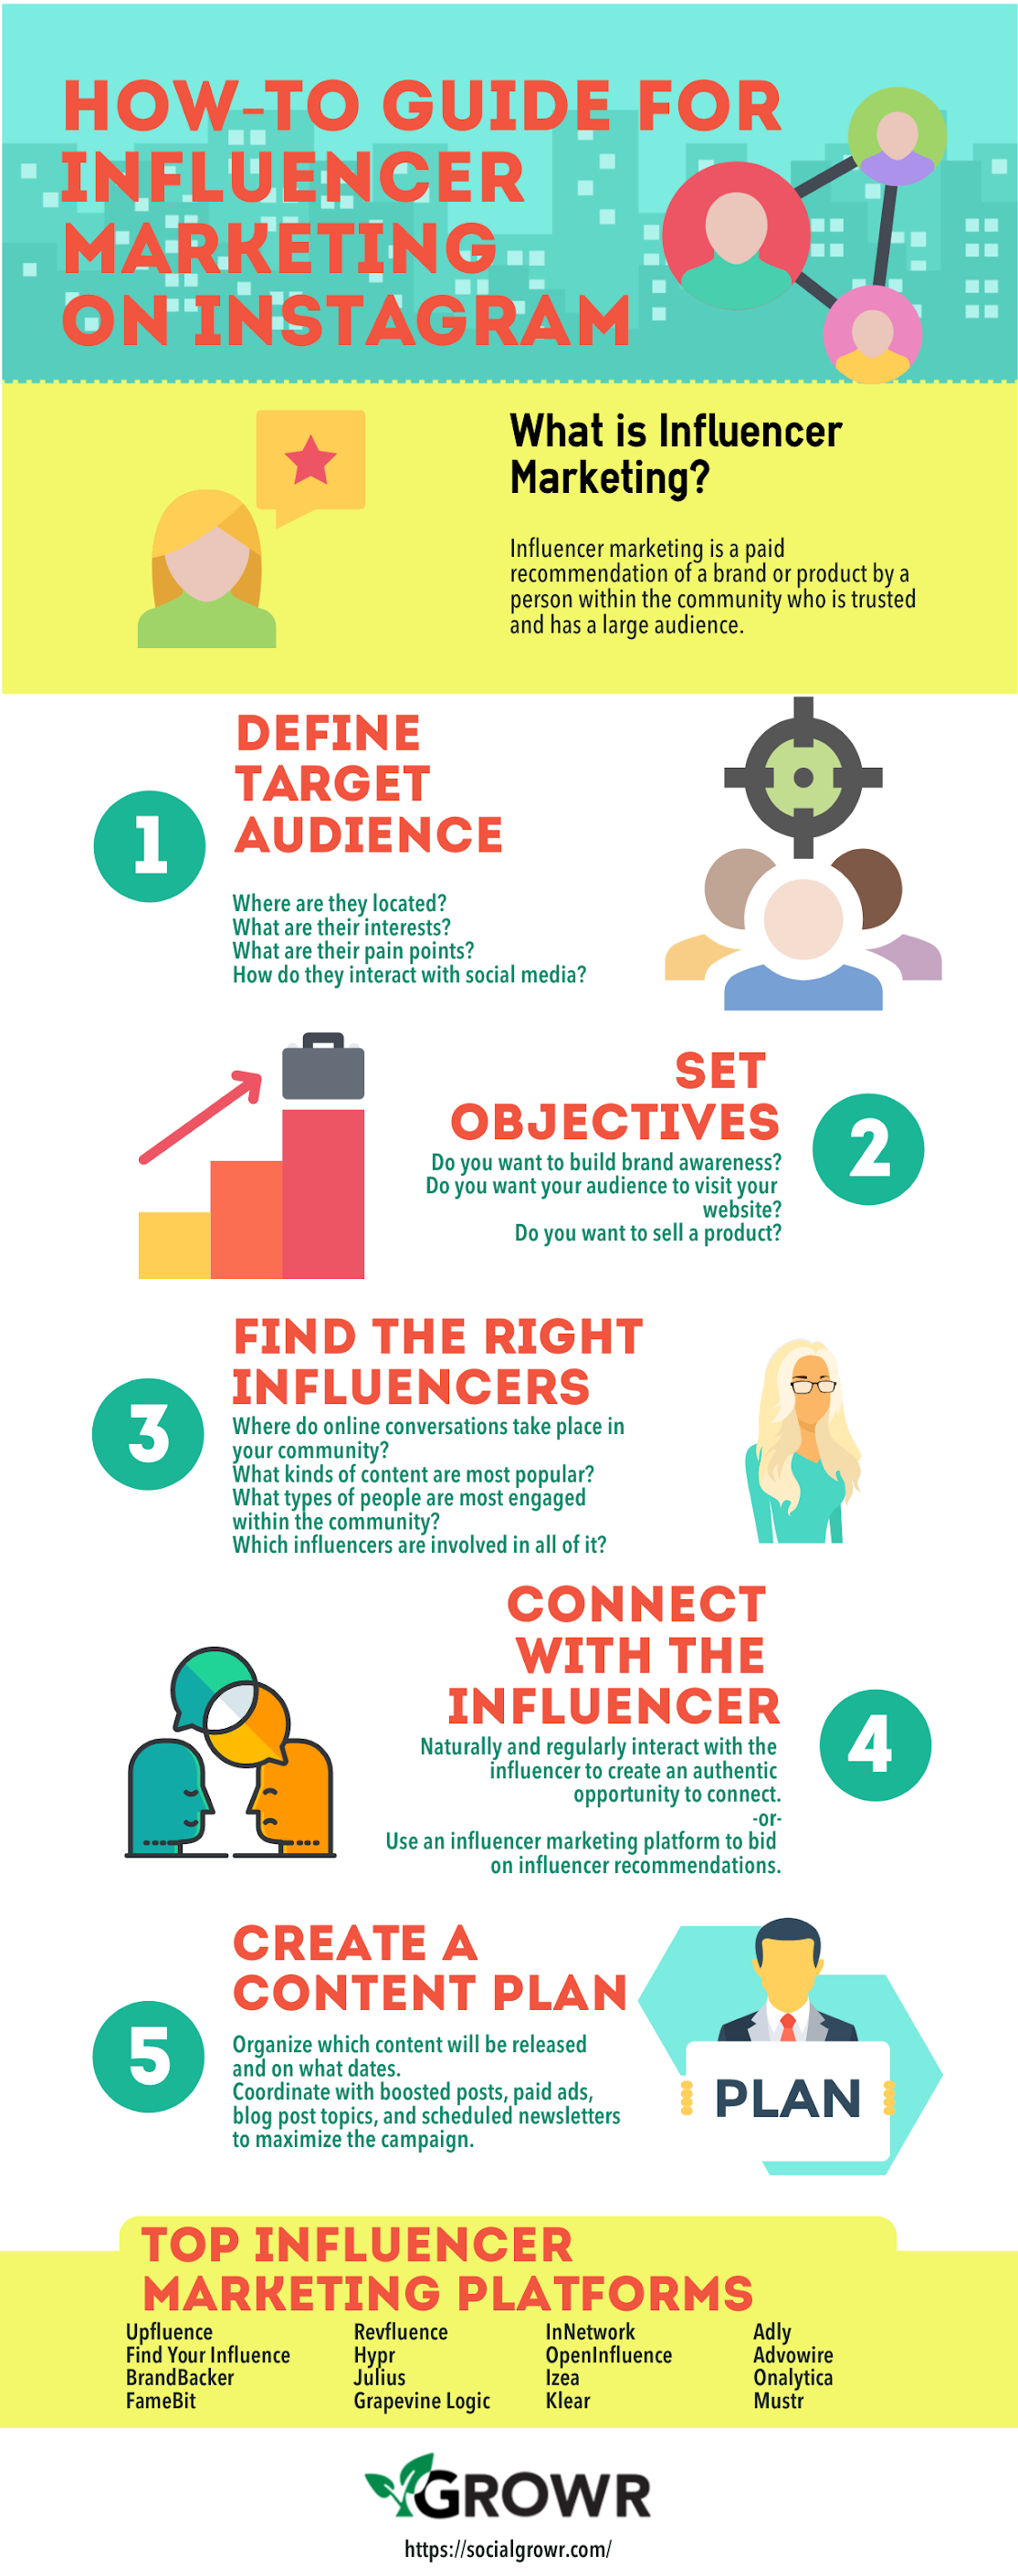 [Infographic] Power Up Your Influencer Marketing with Instagram